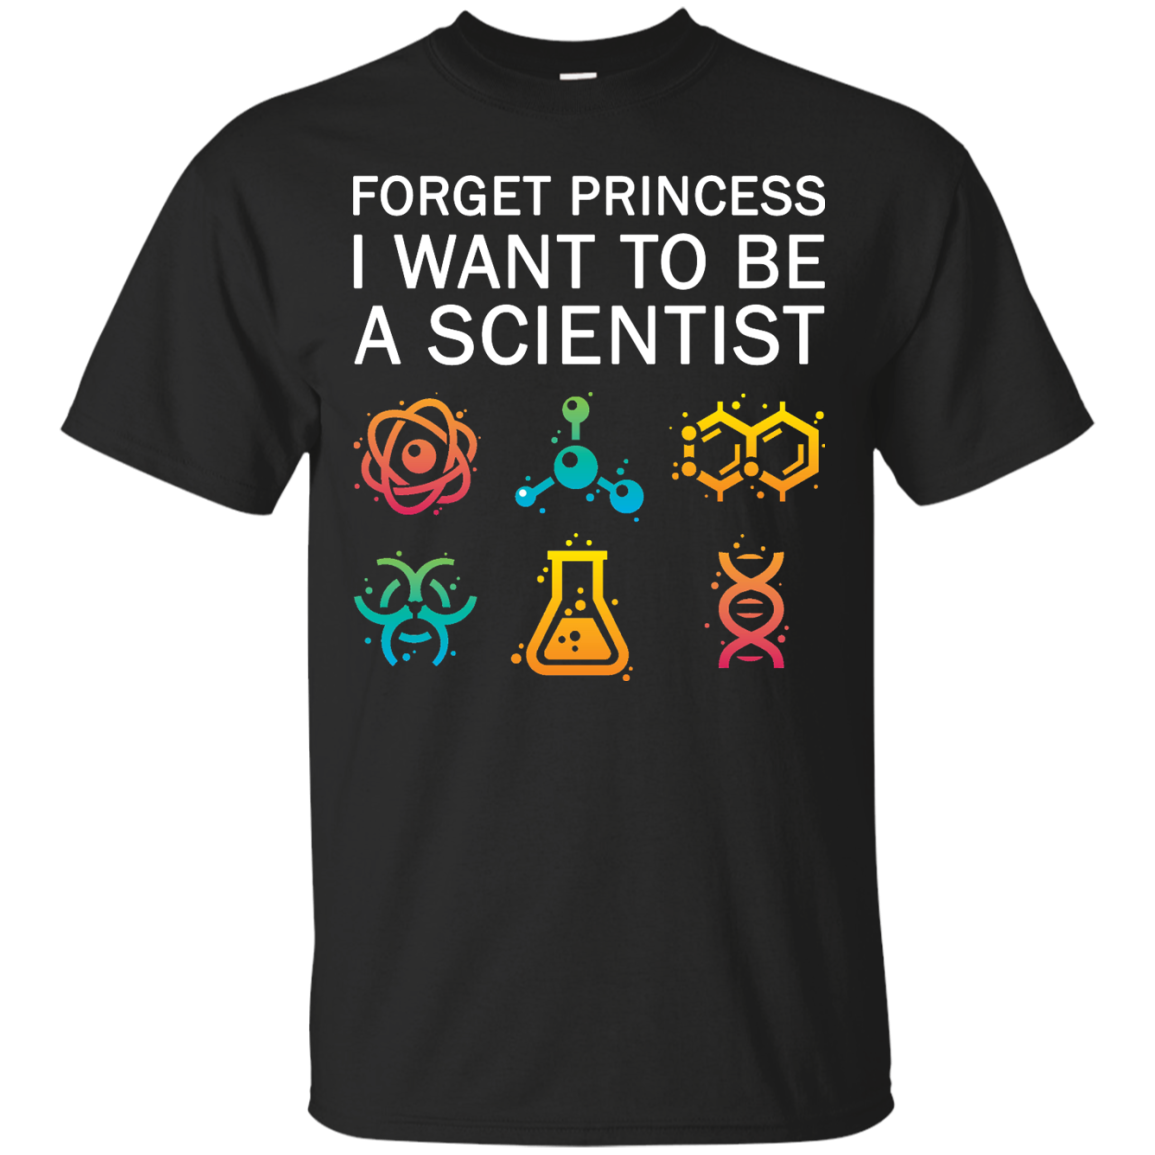 Forget Princess I Want To Be A Scientist shirt for Adult, Youth